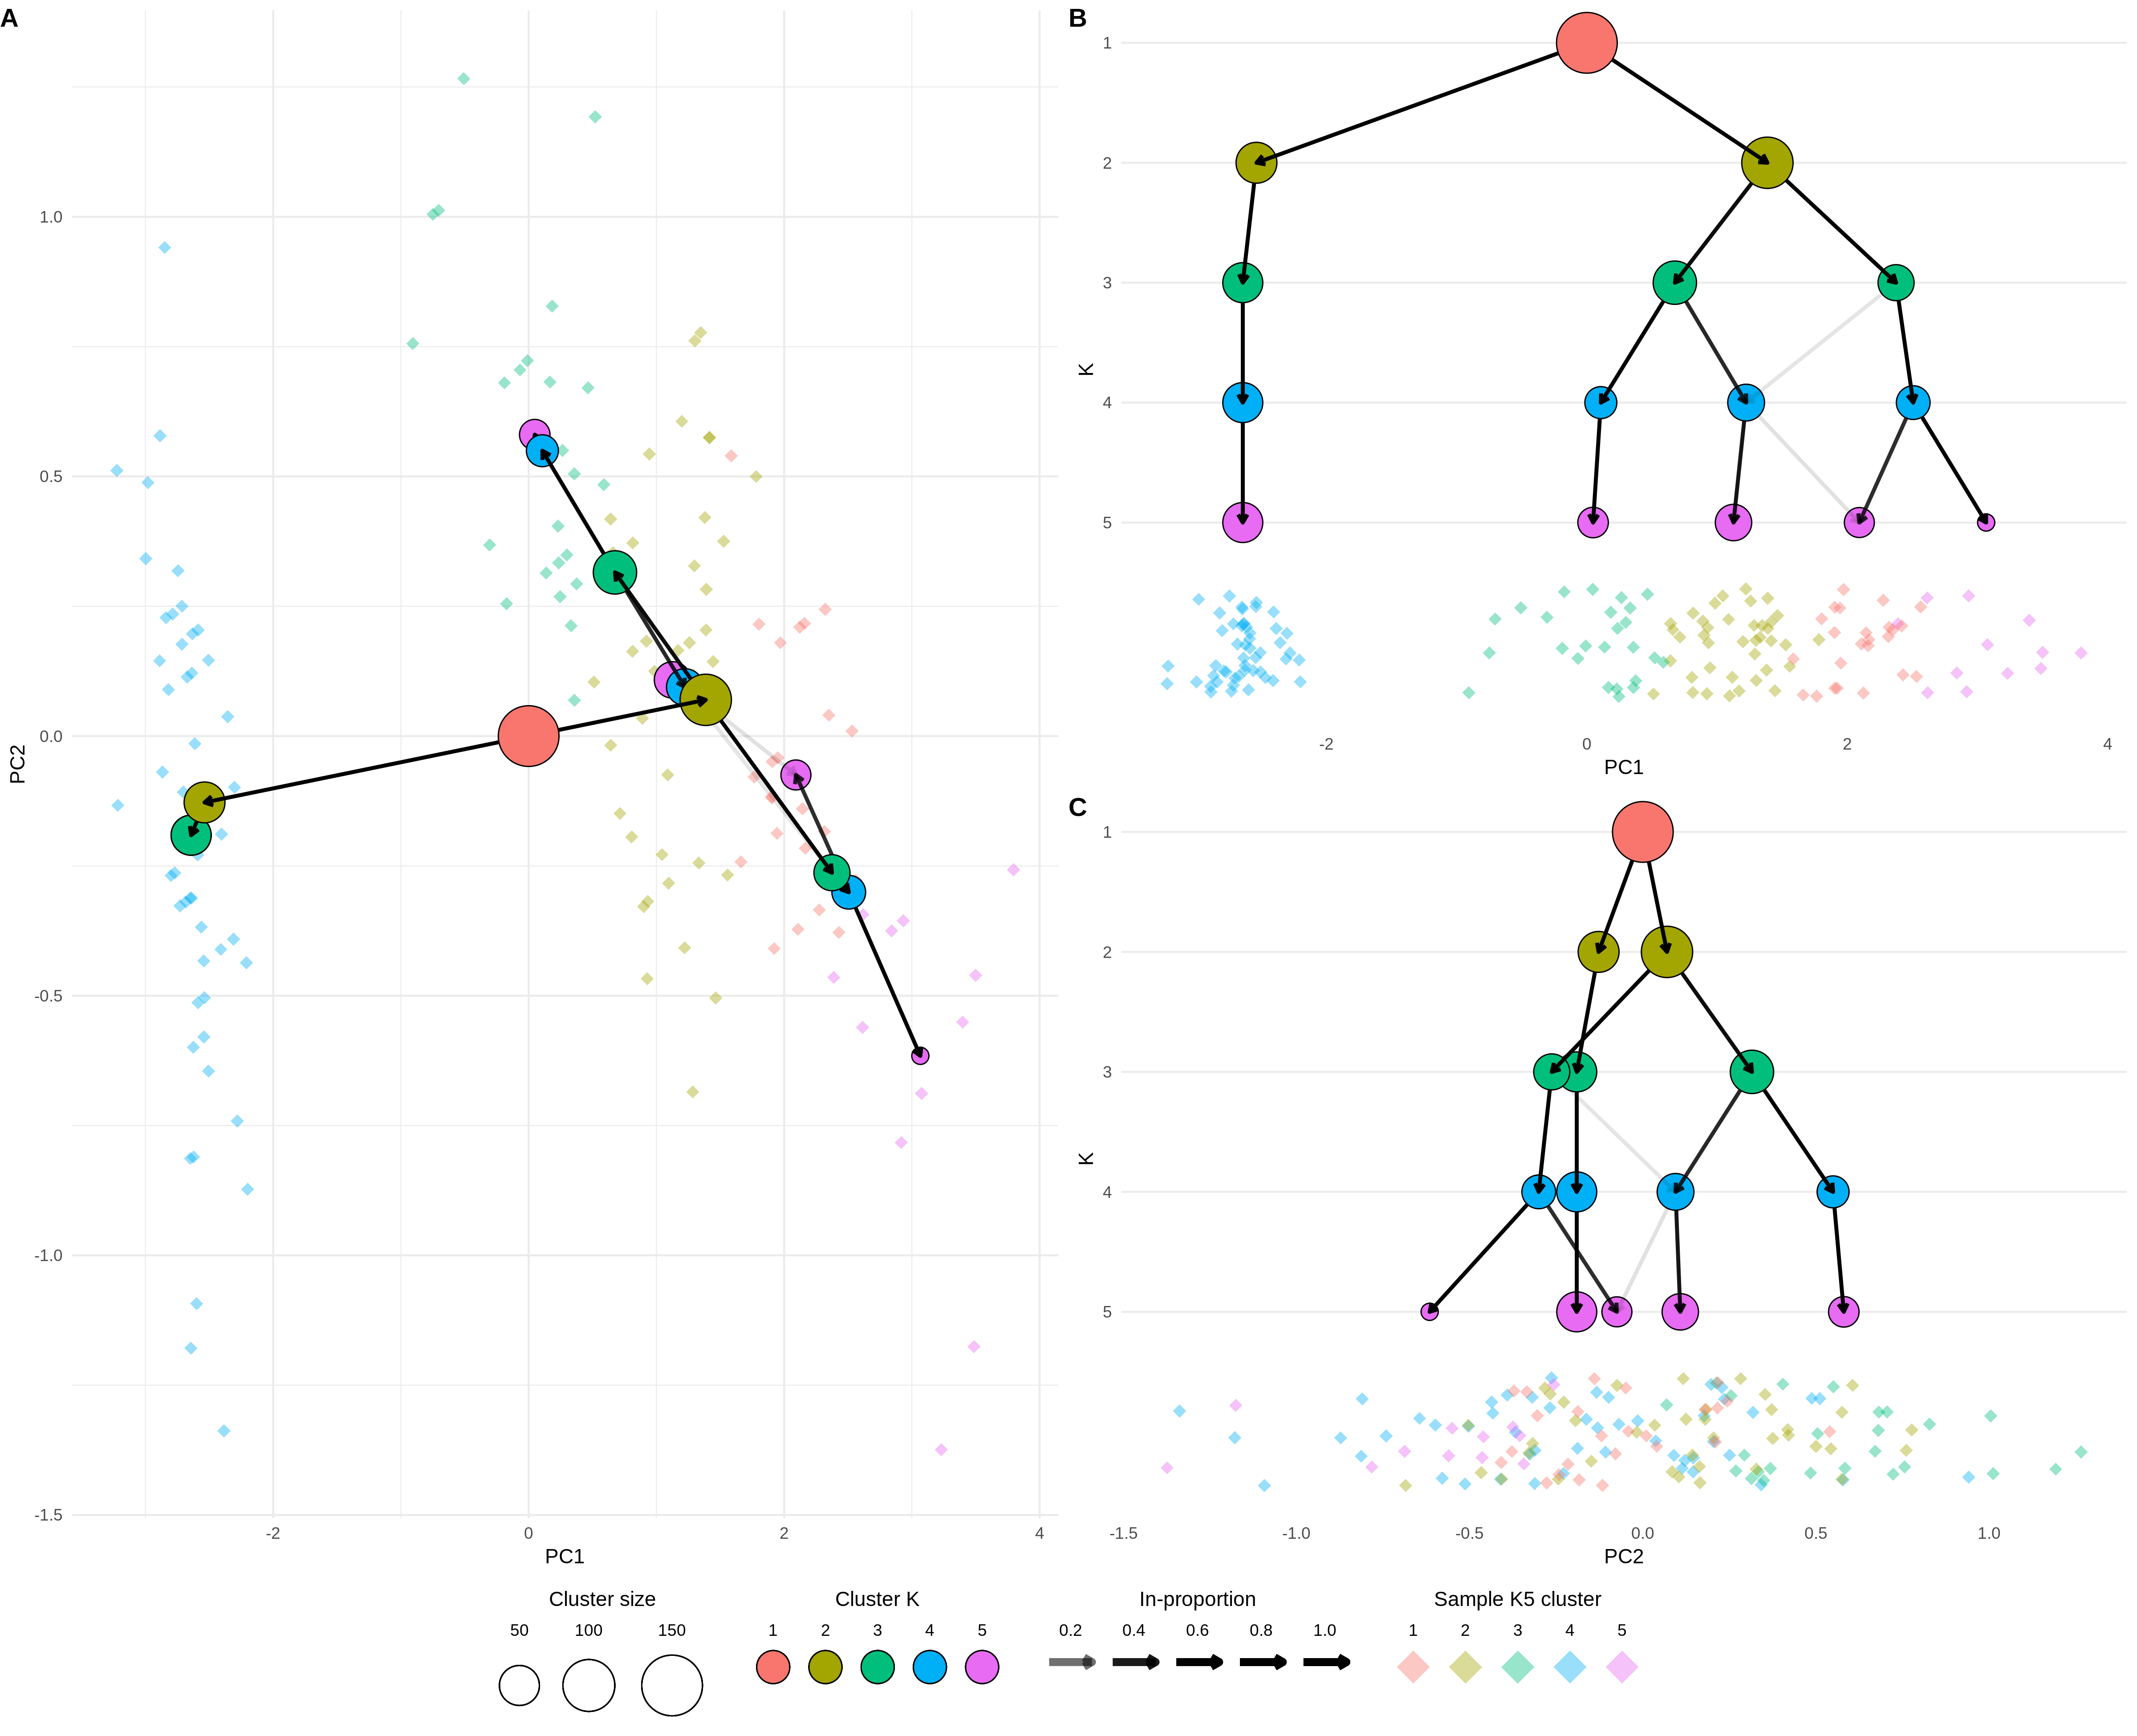 Clustering tree of the iris dataset overlaid on a PCA plot. (A) A PCA plot of the samples in the iris dataset coloured by cluster at \(k = 5\) overlaid with a clustering tree showing clustering resolutions from \(k = 1\) to \(k = 5\). (B) The same plot shown from the direction of the x-axis (PC1), the y-axis now shows the clustering resolution and samples are jittered along the x-axis. (C) Same as (B) but from the direction of the y-axis (PC2).